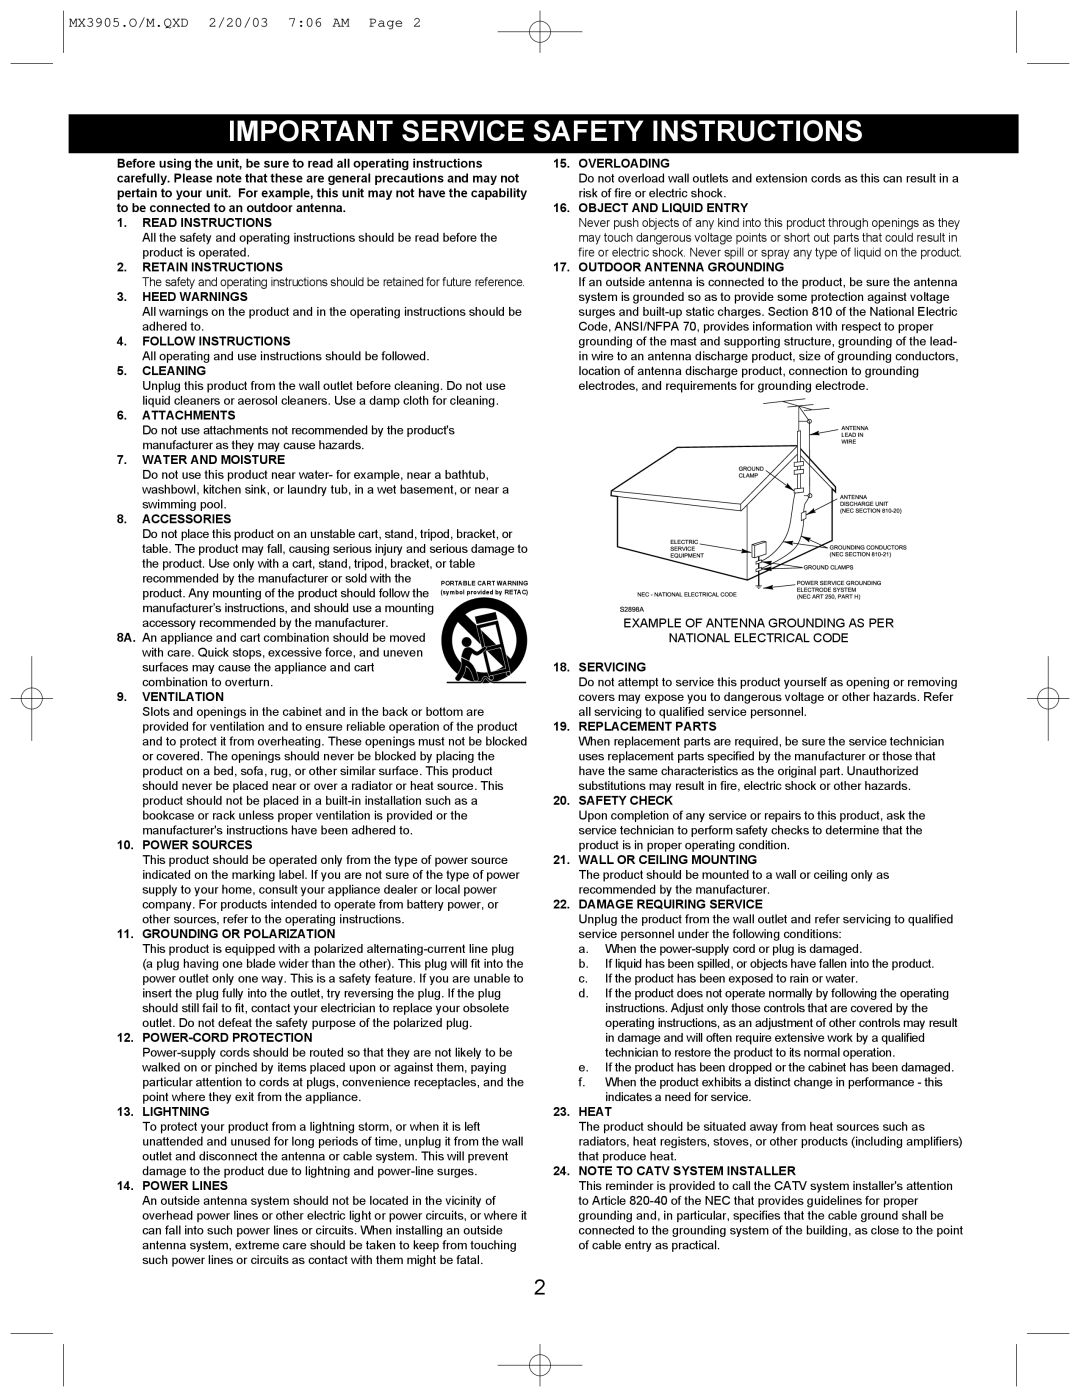 Memorex manual Important Service Safety Instructions, MX3905.O/M.QXD 2/20/03 7 06 AM Page 